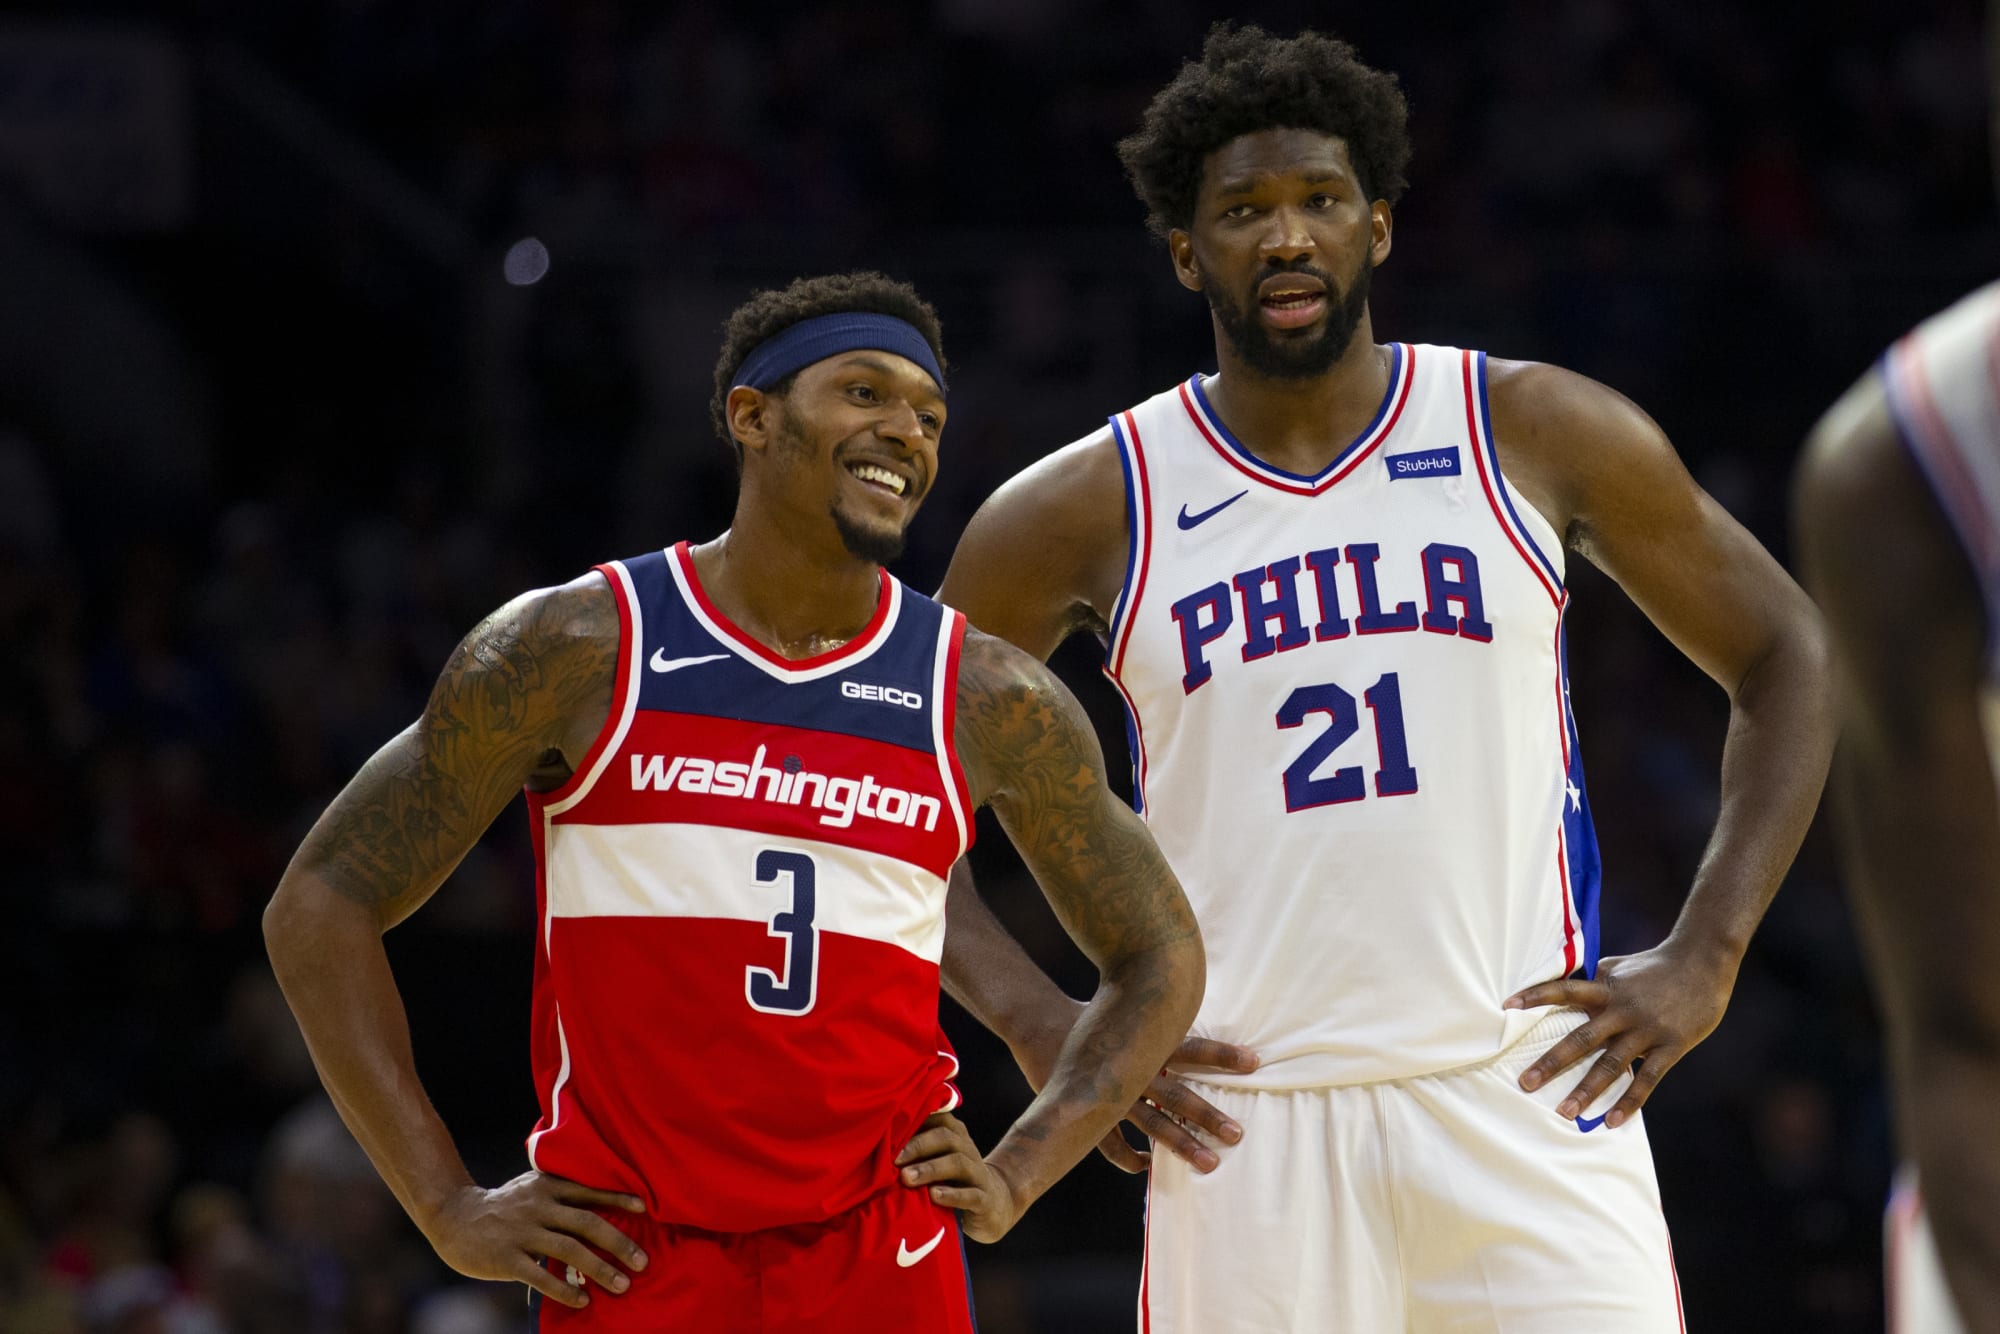 NBA rumors: Joel Embiid was once pushing for Bradley Beal ahead of James Harden business